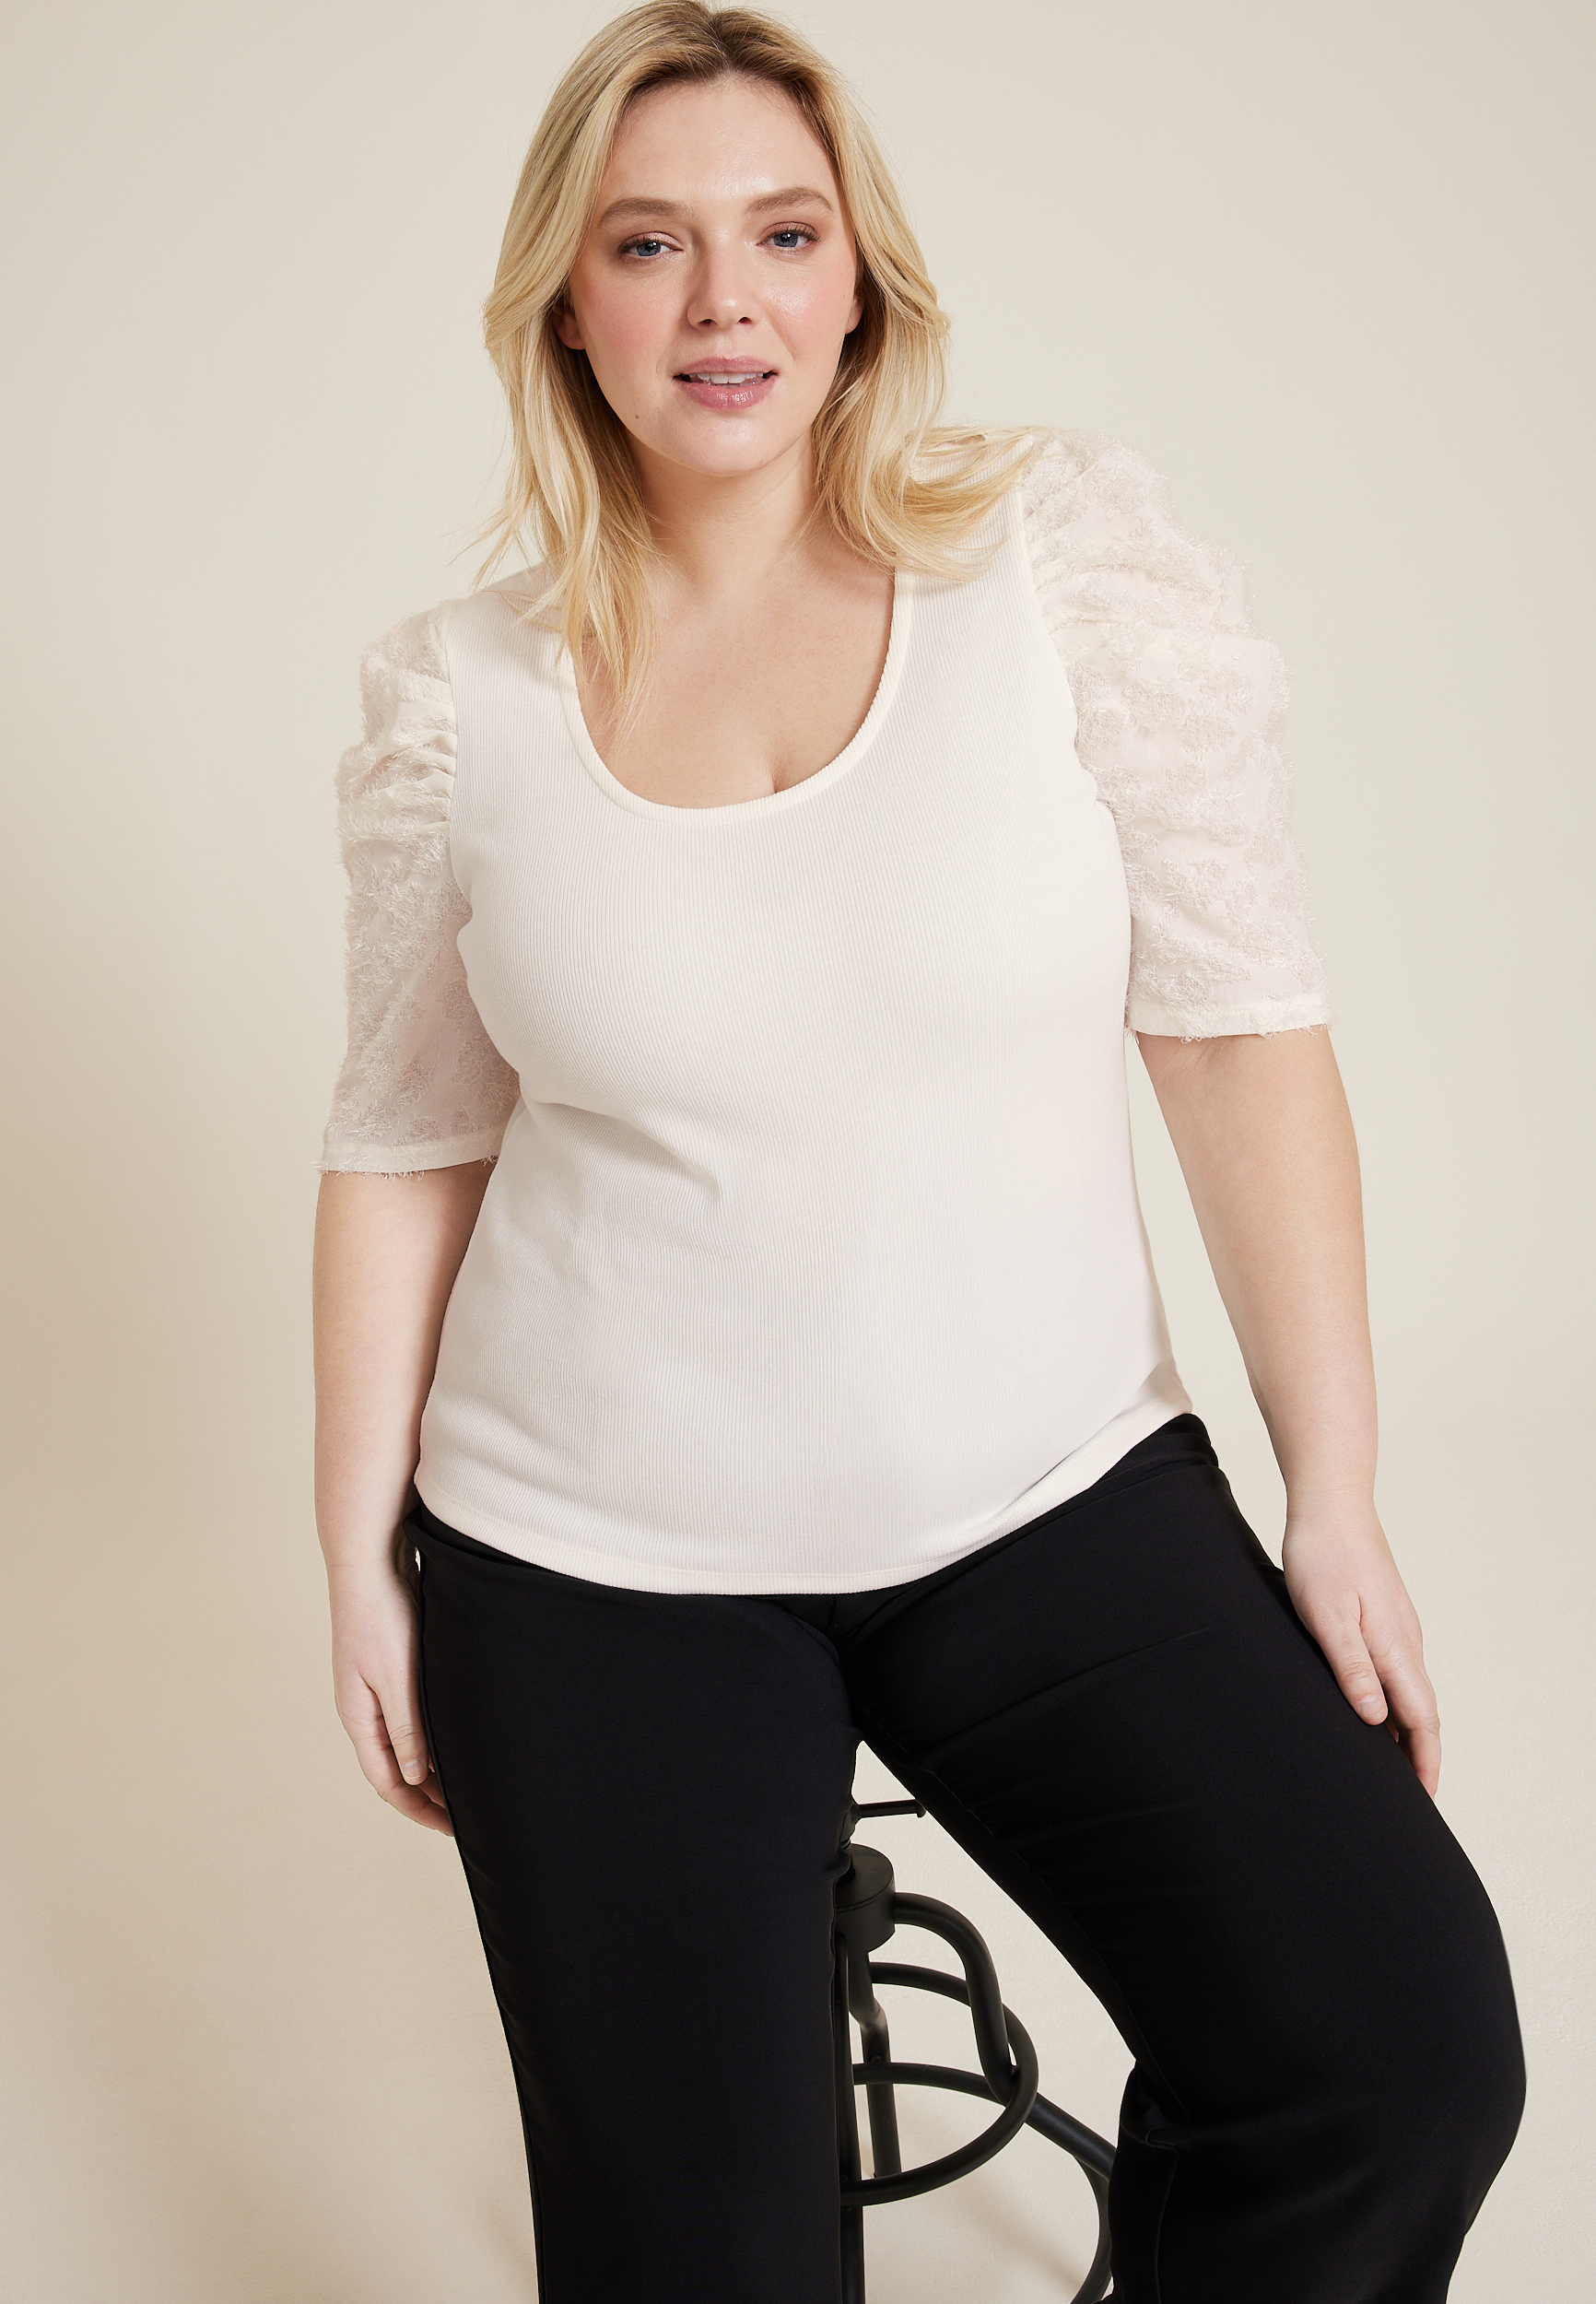 MTA Sport Plus-Sized Clothing On Sale Up To 90% Off Retail